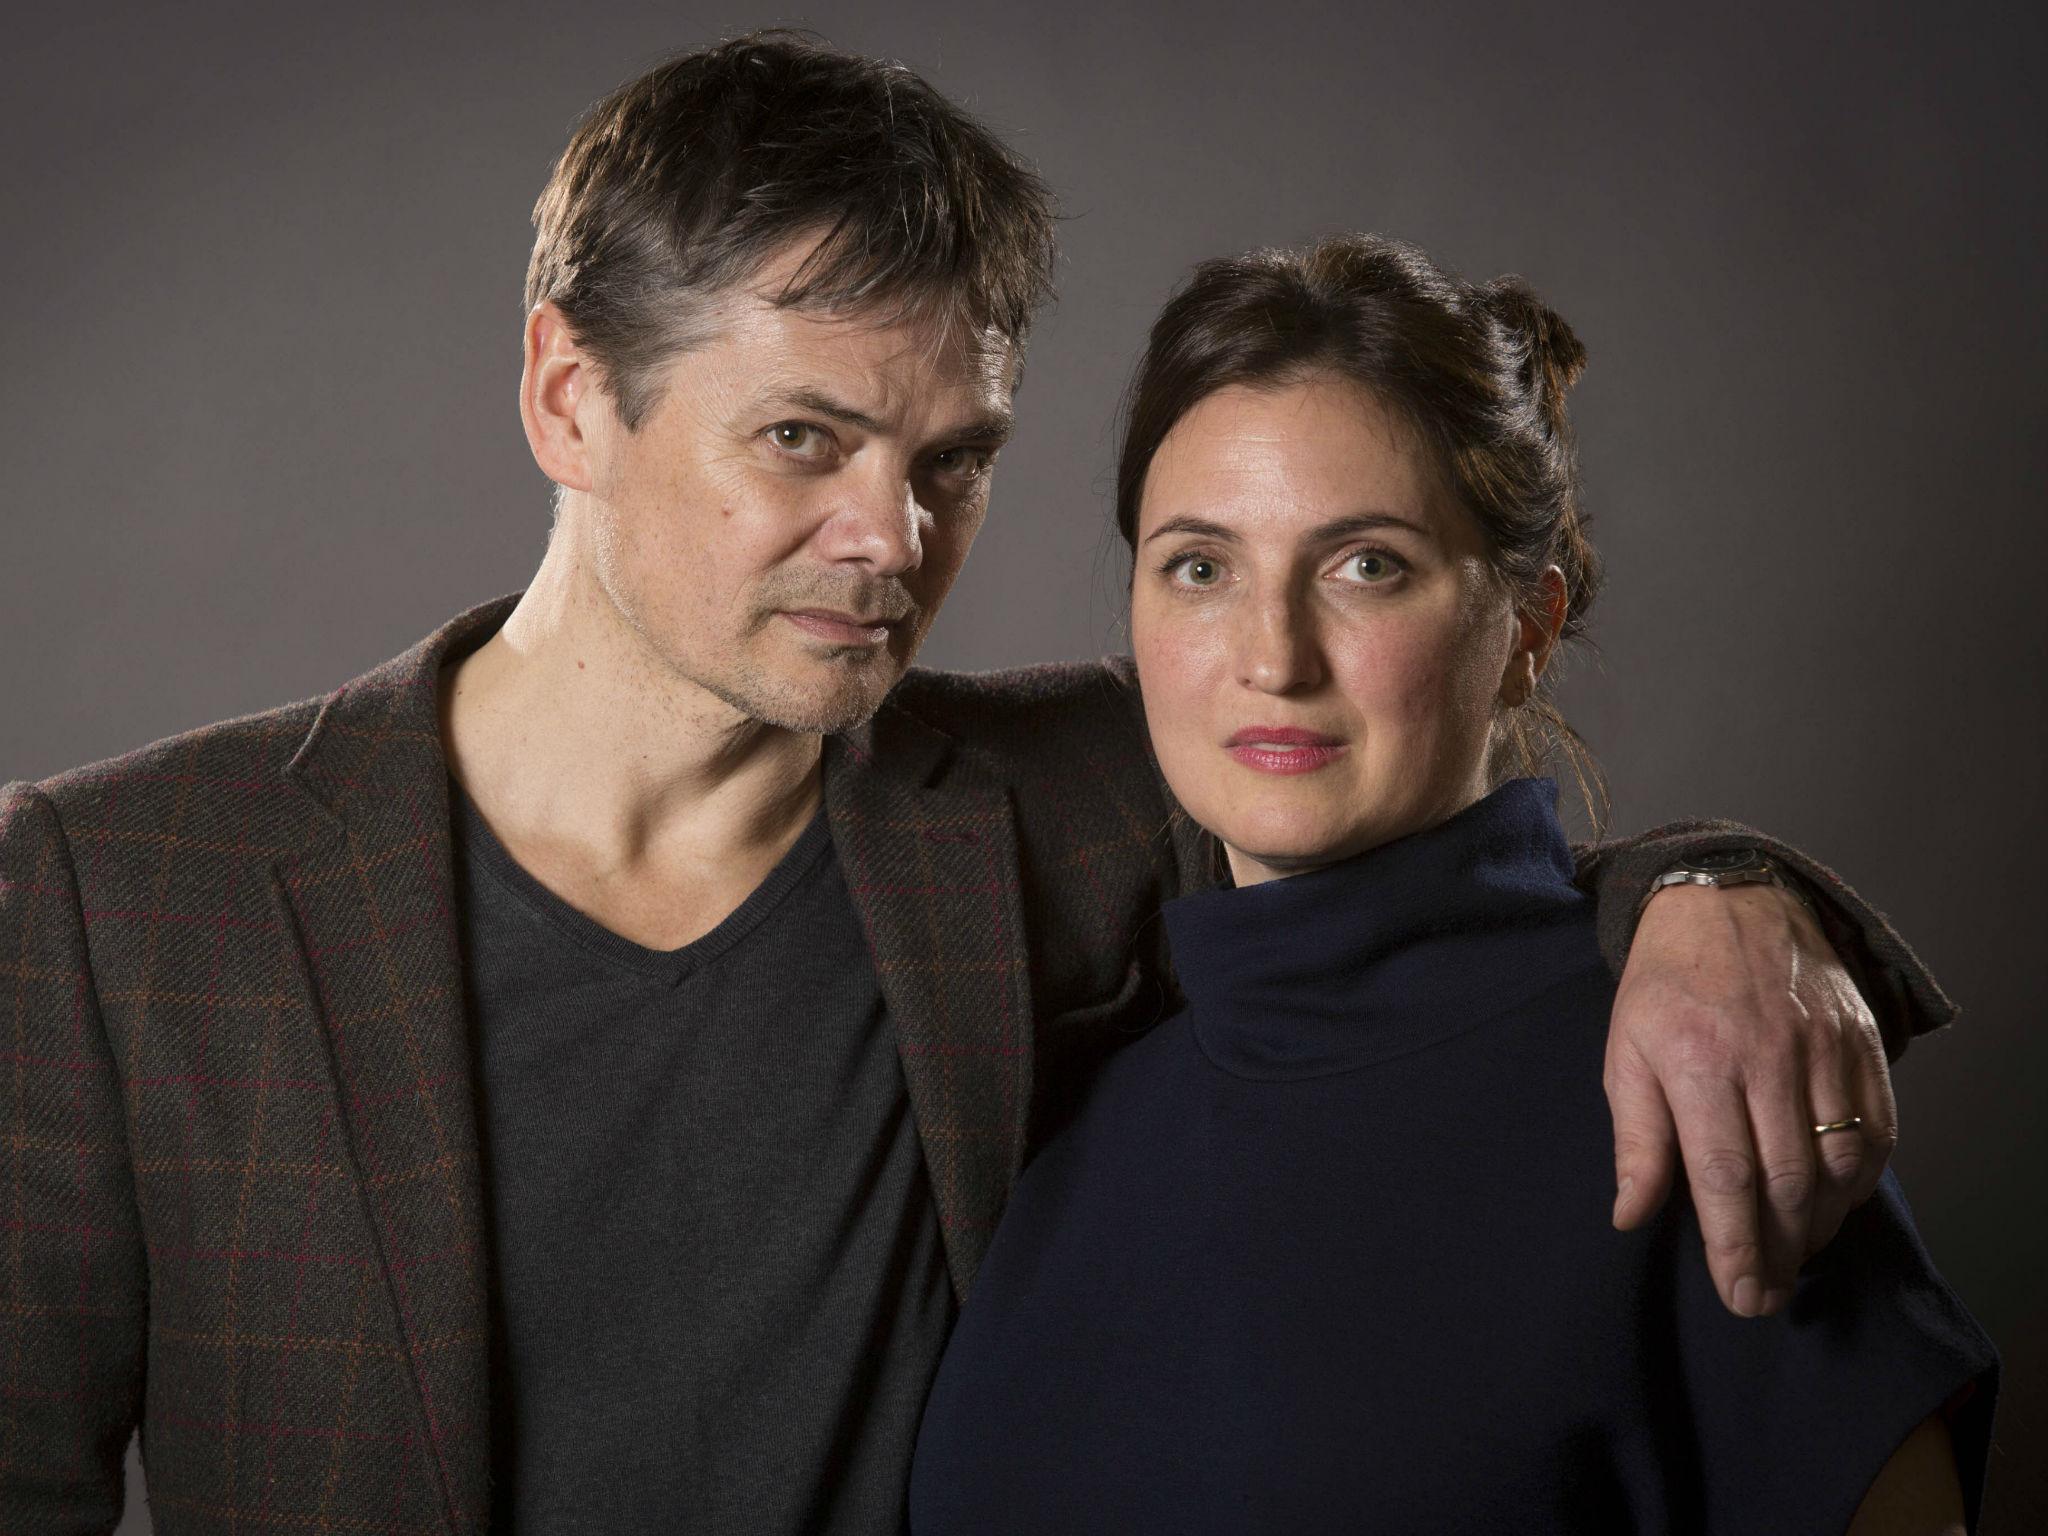 Helen Titchener stabbed her husband Rob in The Archers, after enduring months of domestic abuse.